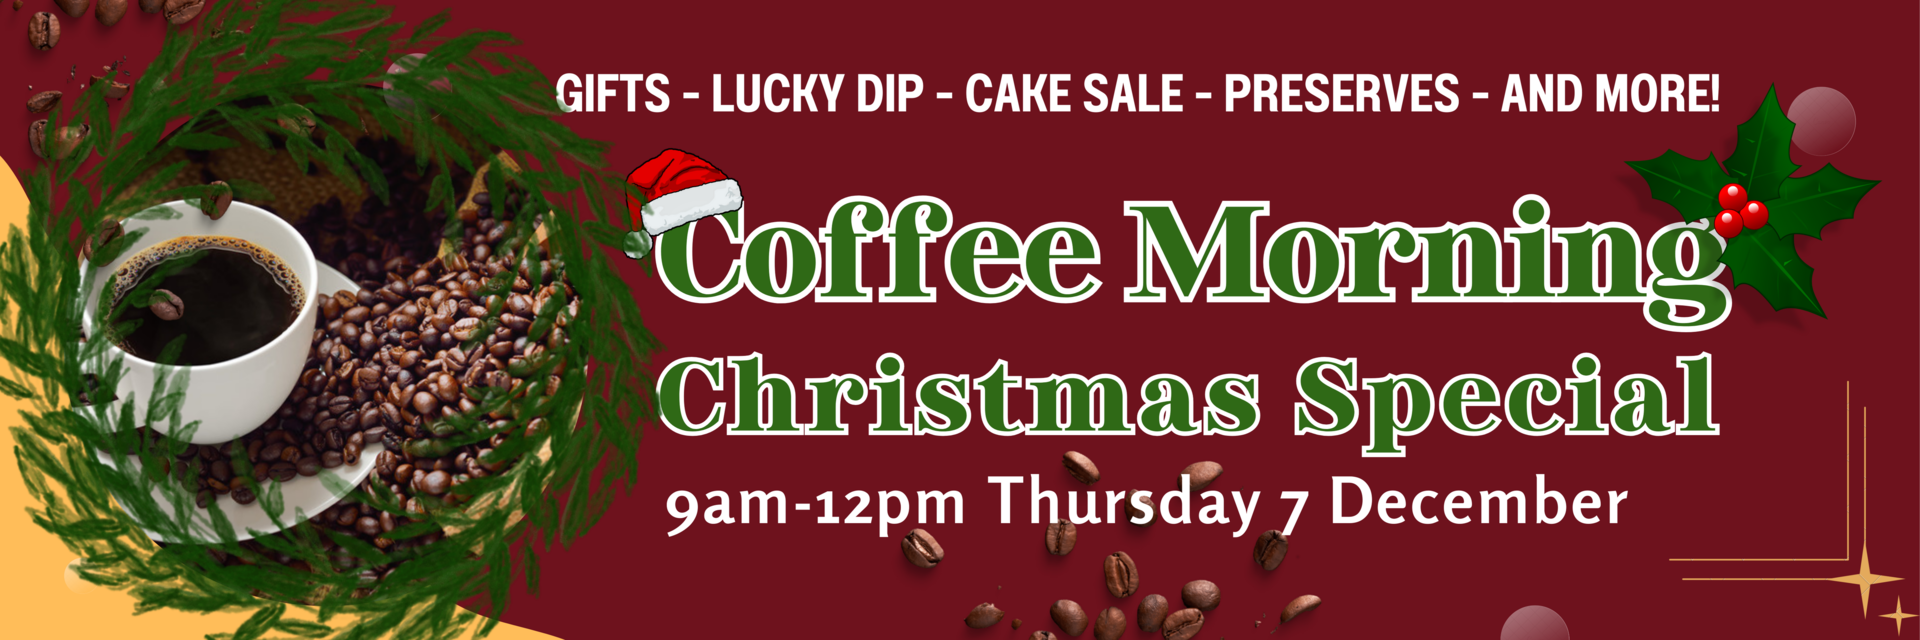 Coffee Morning Christmas Special Advert